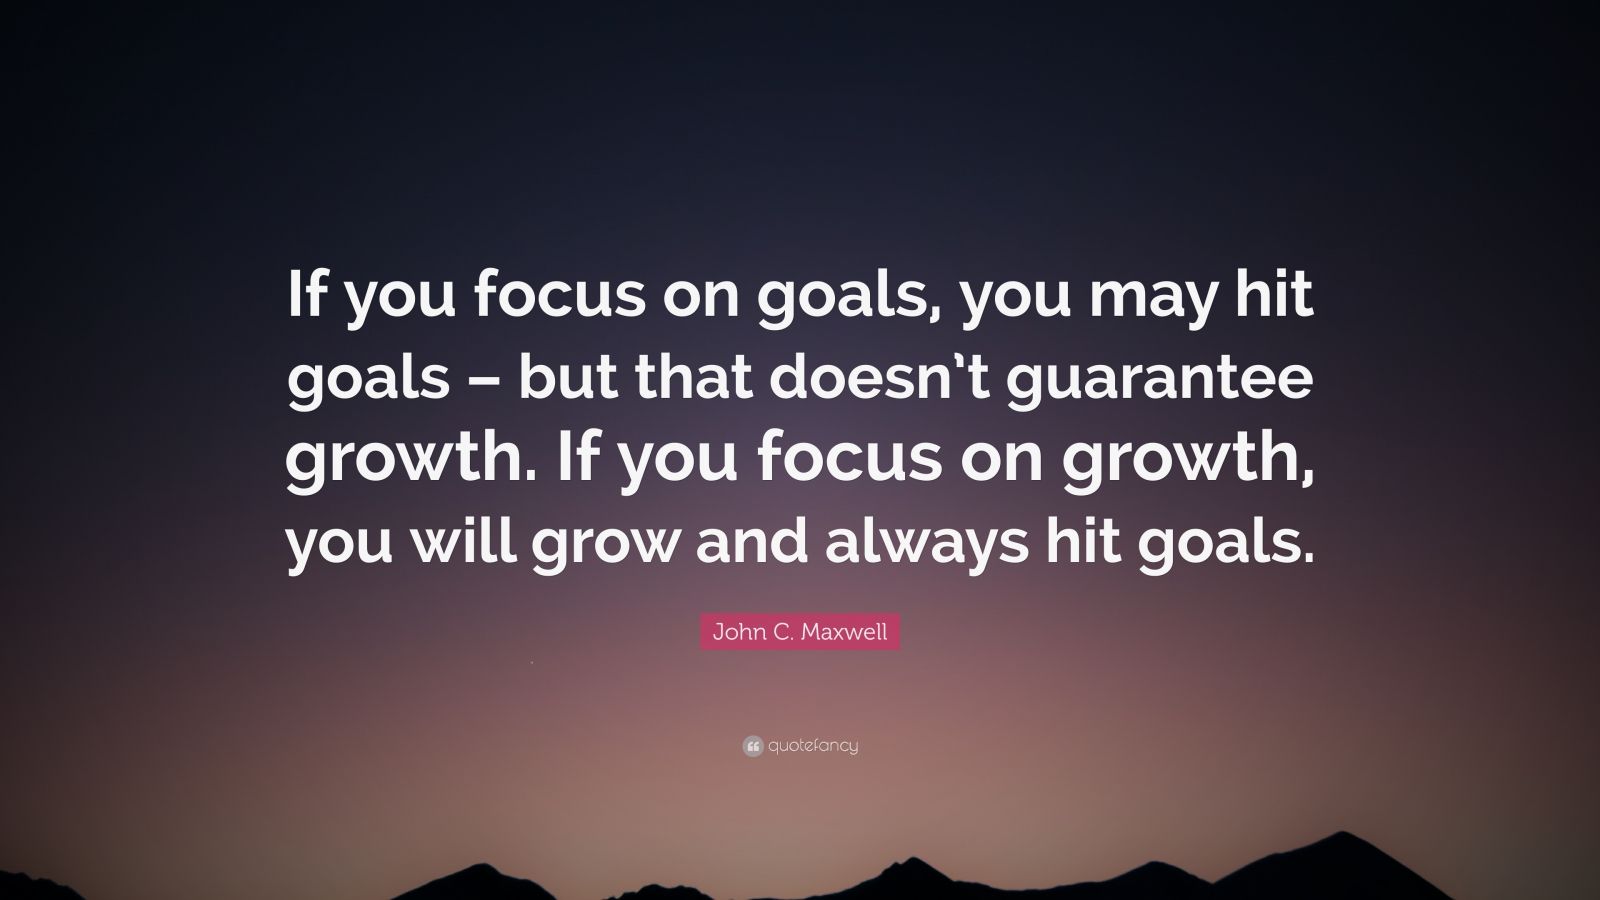 John C. Maxwell Quote “If you focus on goals, you may hit goals but